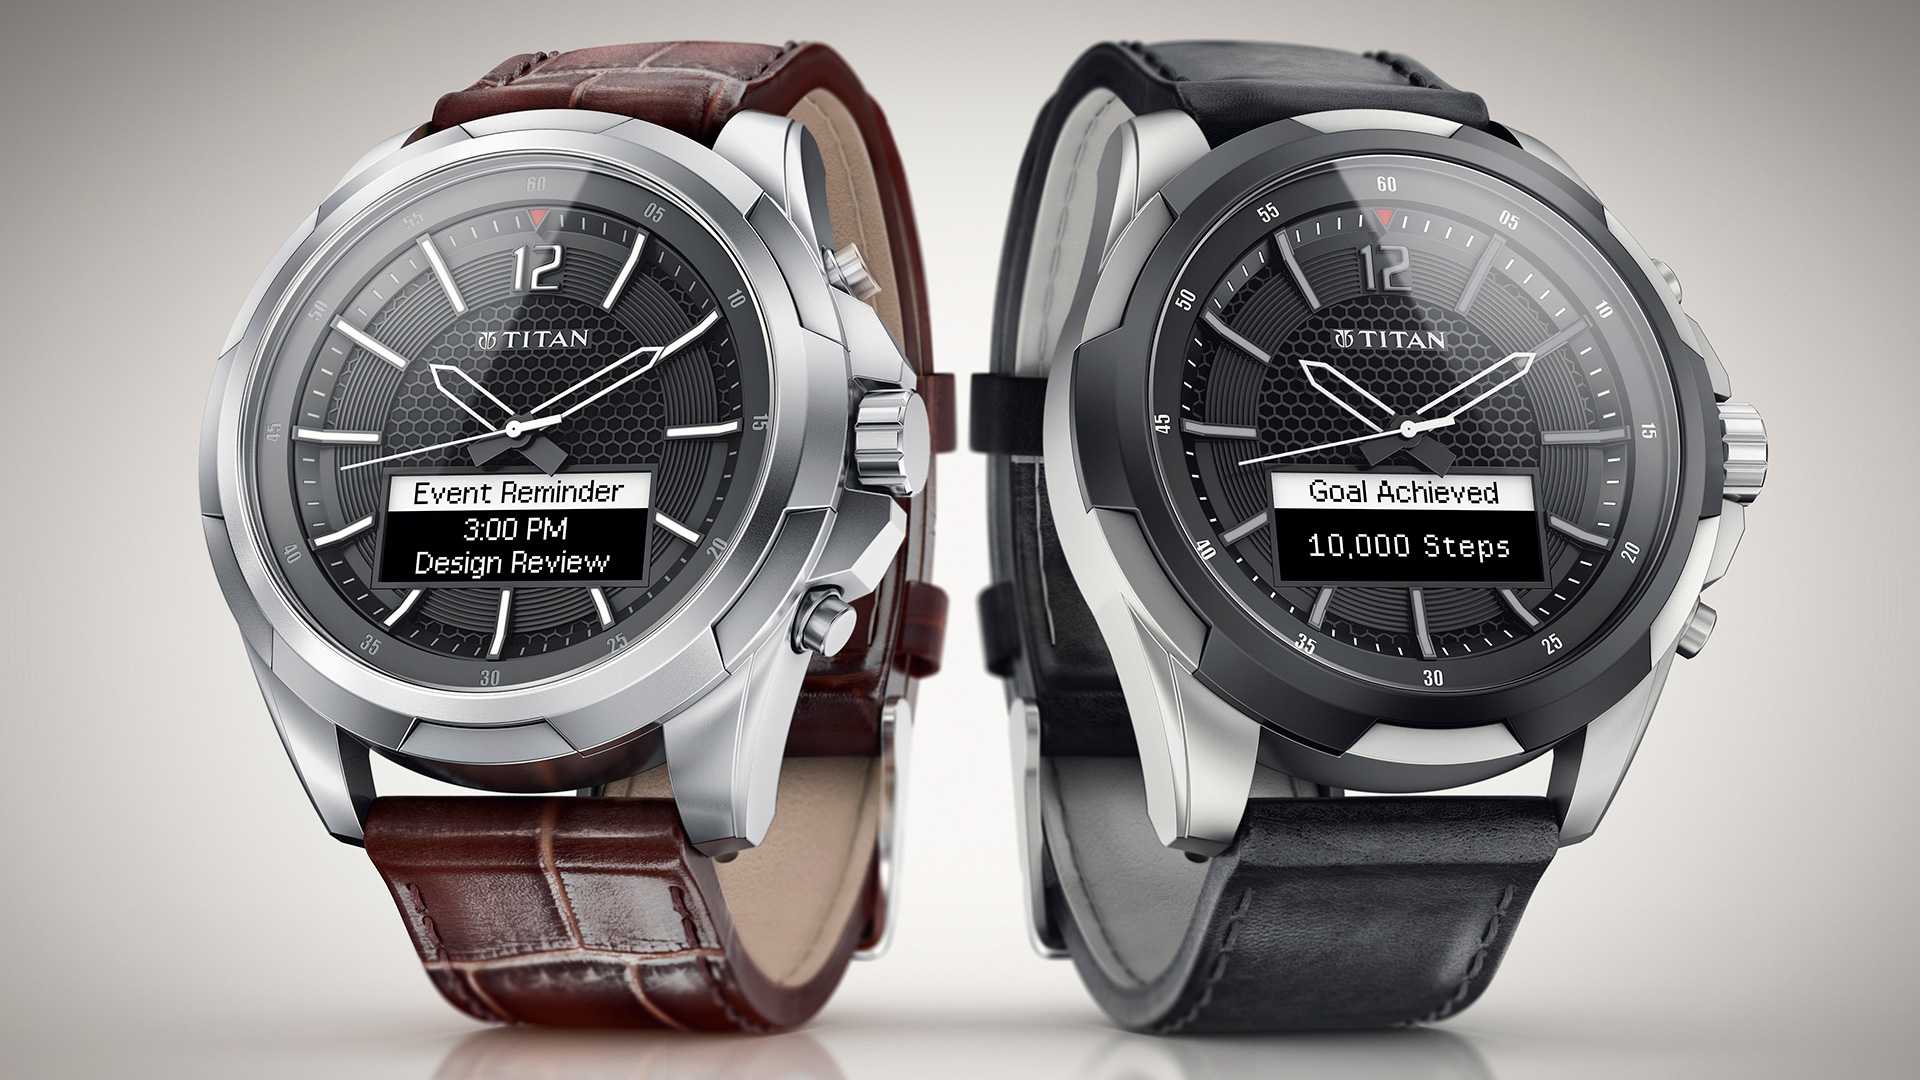 Titan Juxt the first made-in-India smartwatch